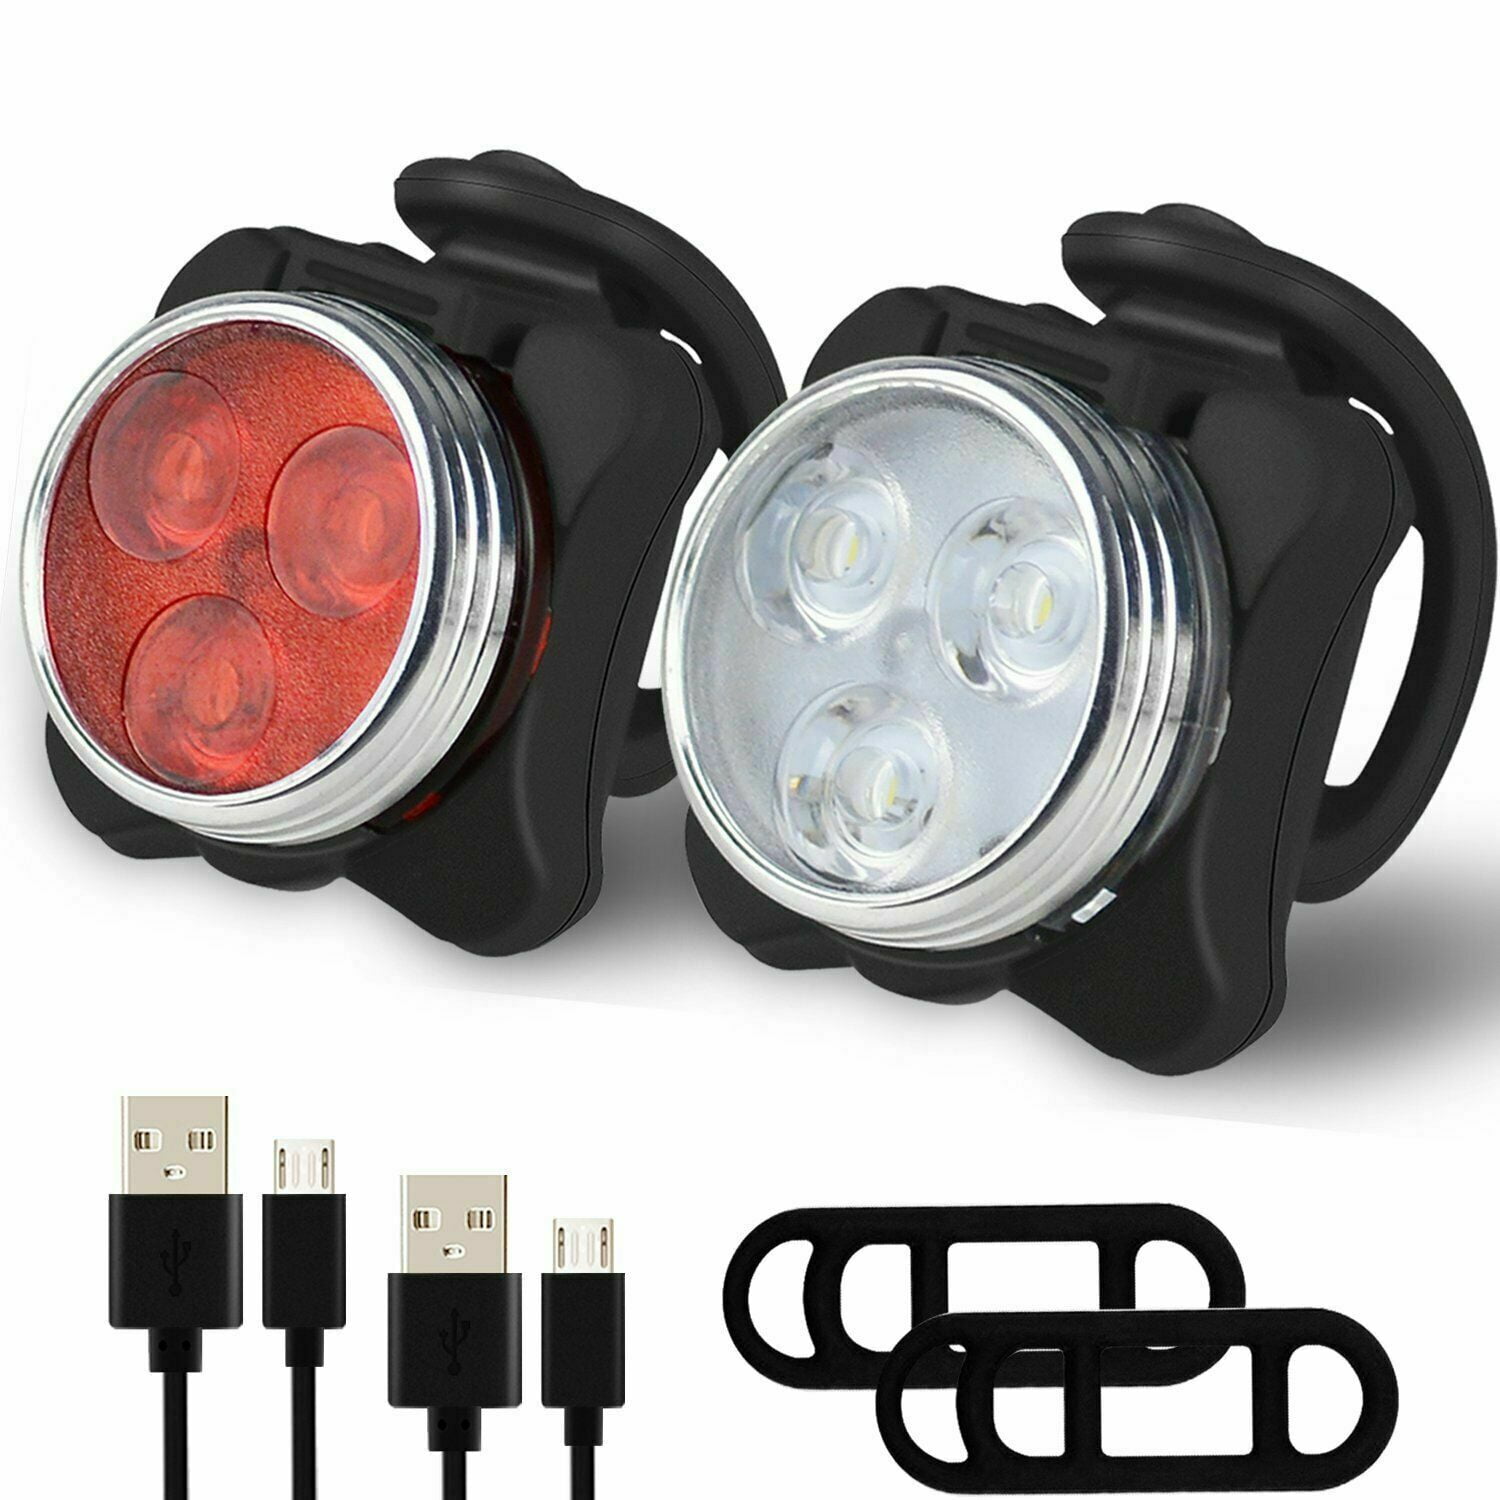 USB Rechargeable LED Bicycle Bike Front Rear Light Set Headlight Taillight Lamps